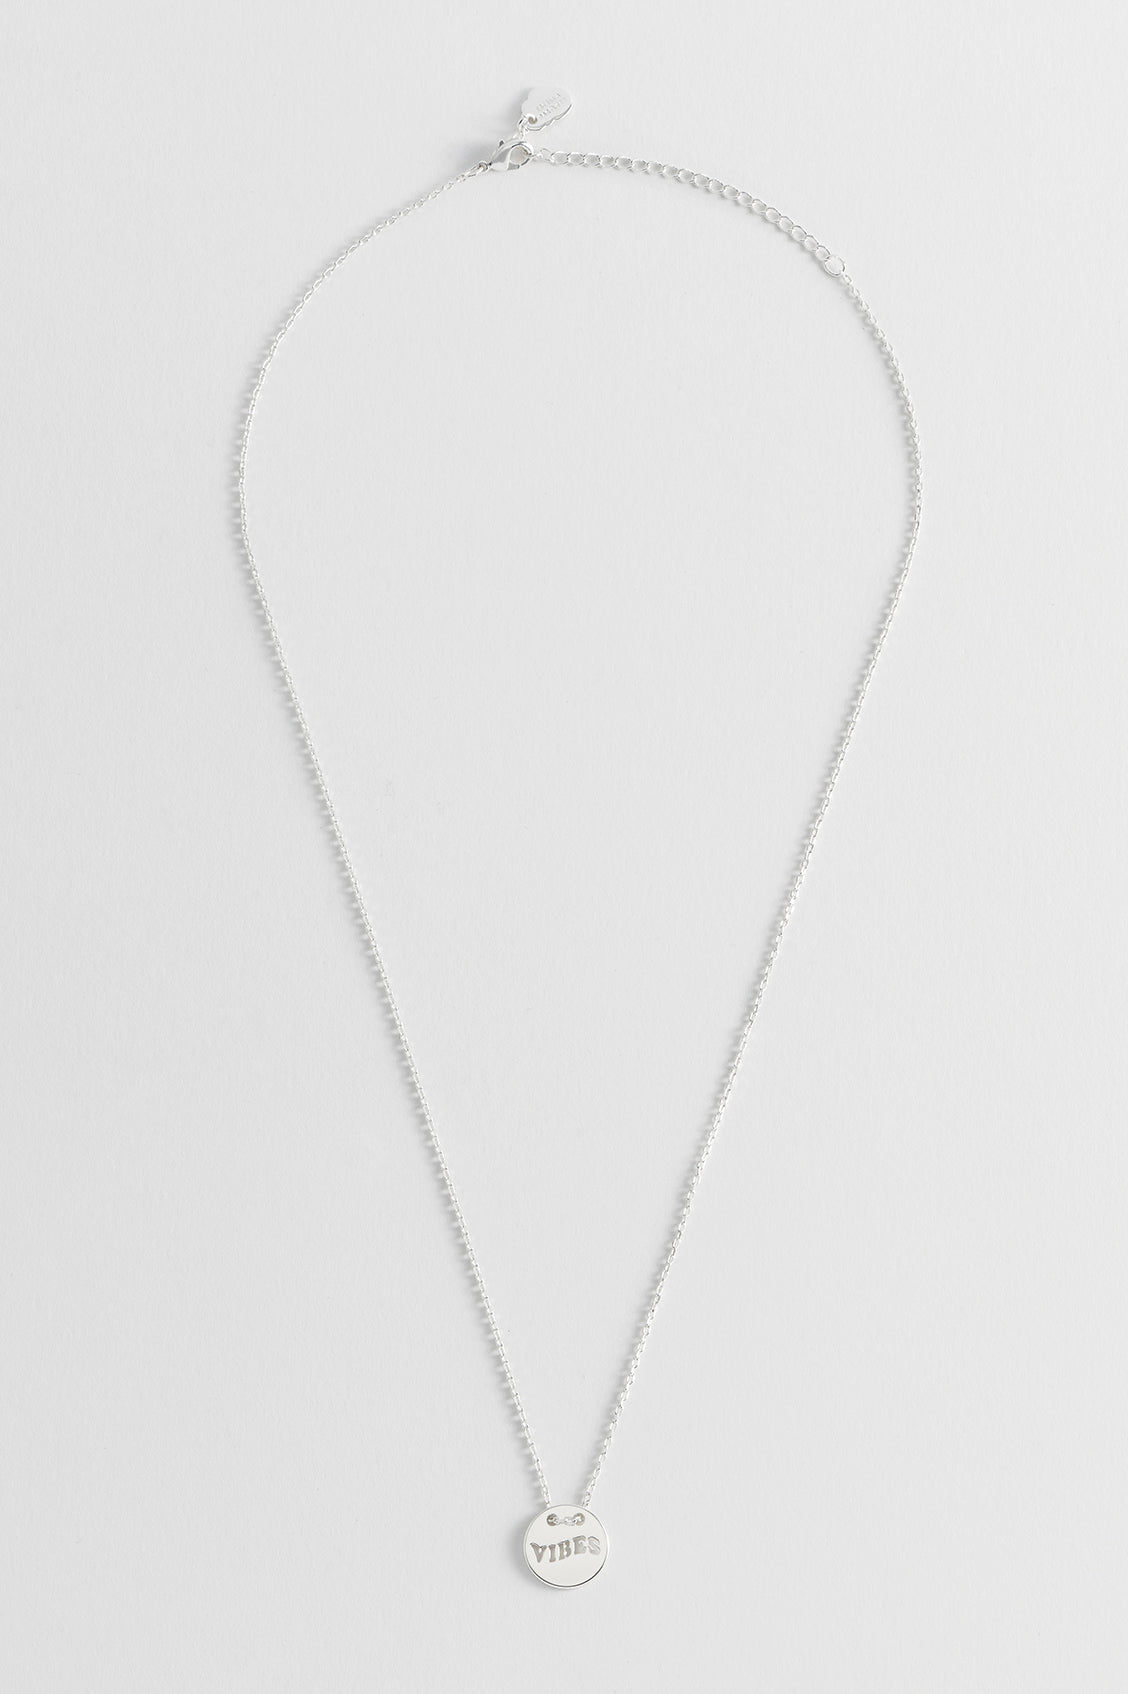 Vibes Cut Out Disc Necklace